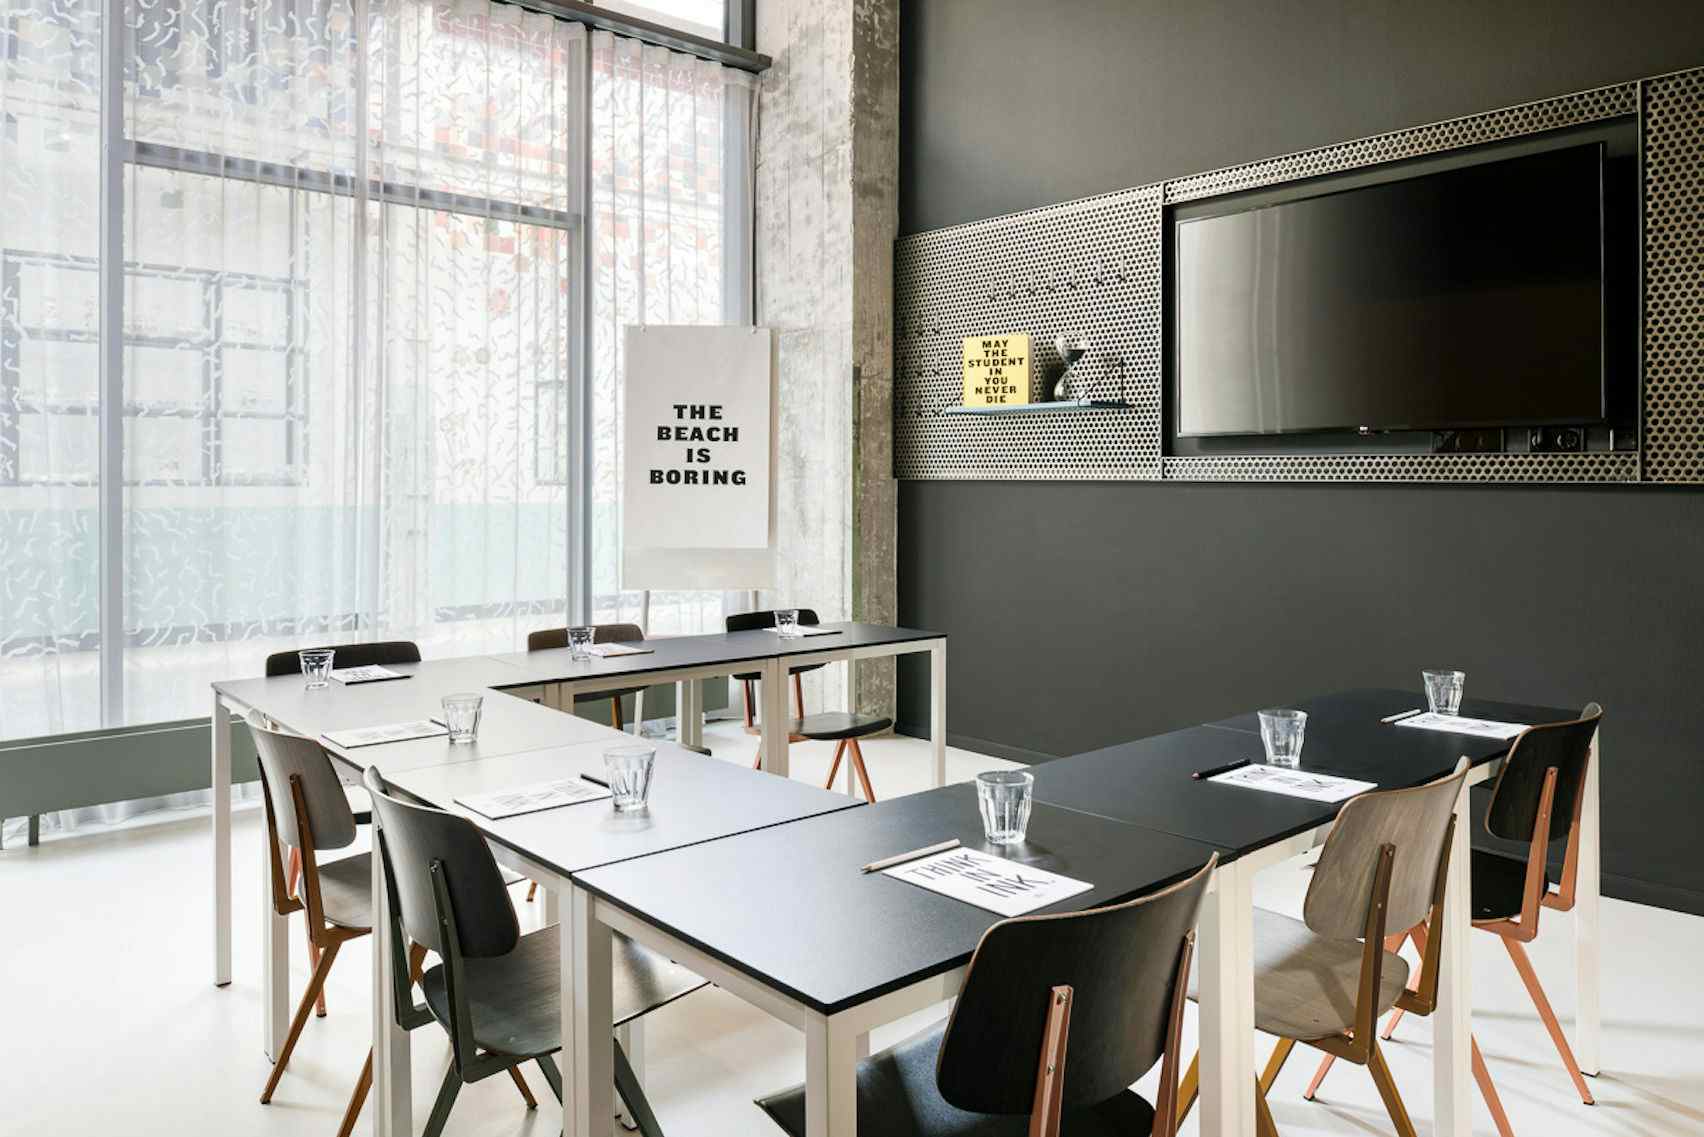 Classroom 1, The Student Hotel Maastricht